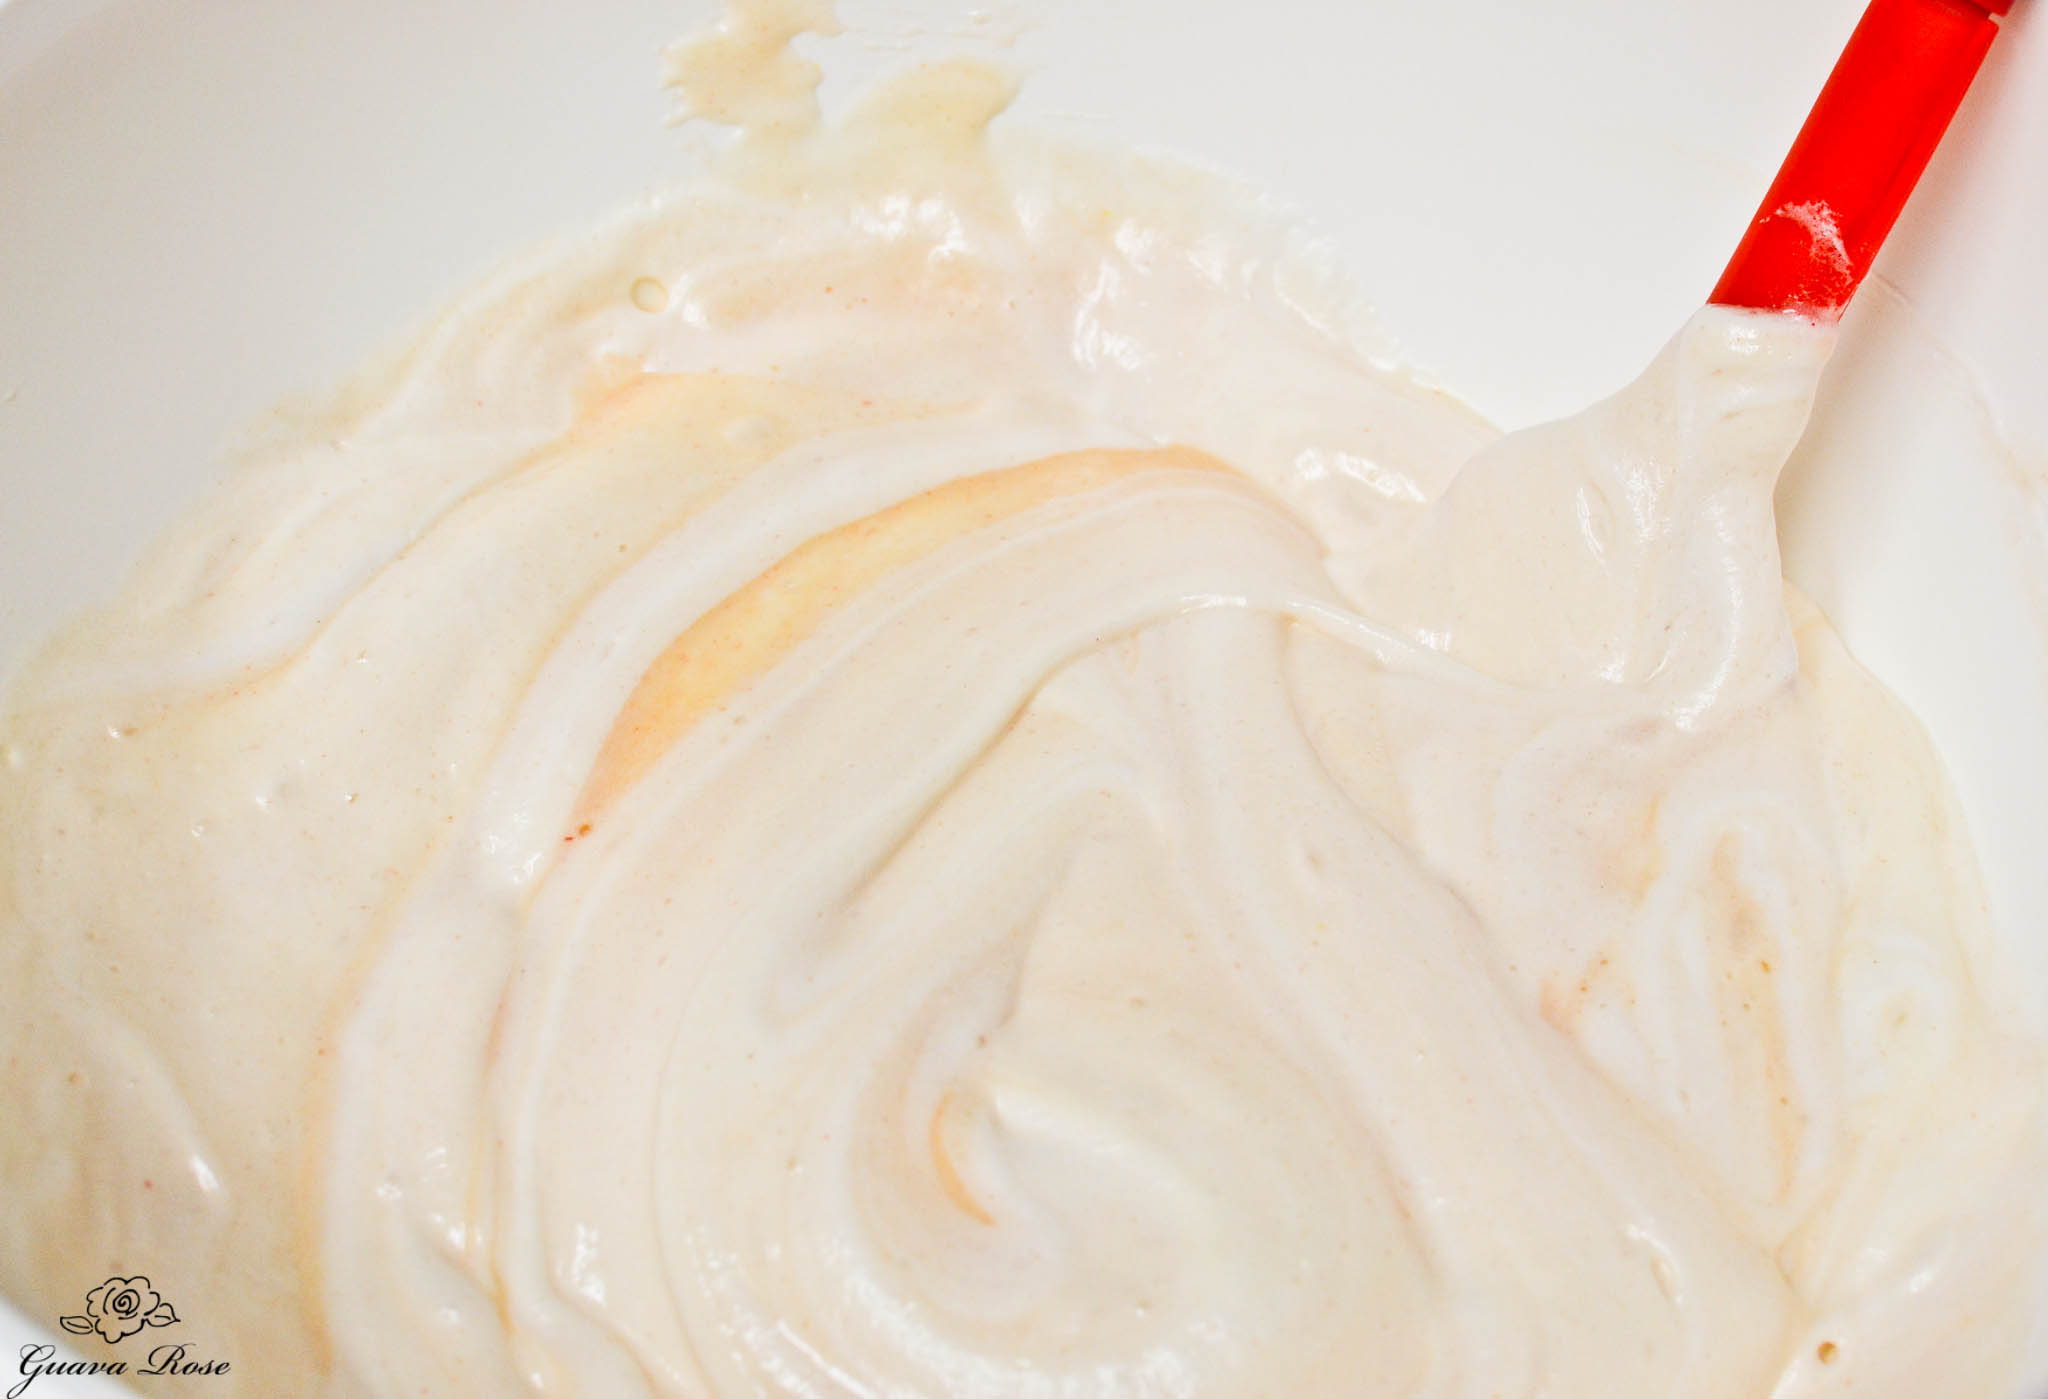 Continuing to fold meringue into batter